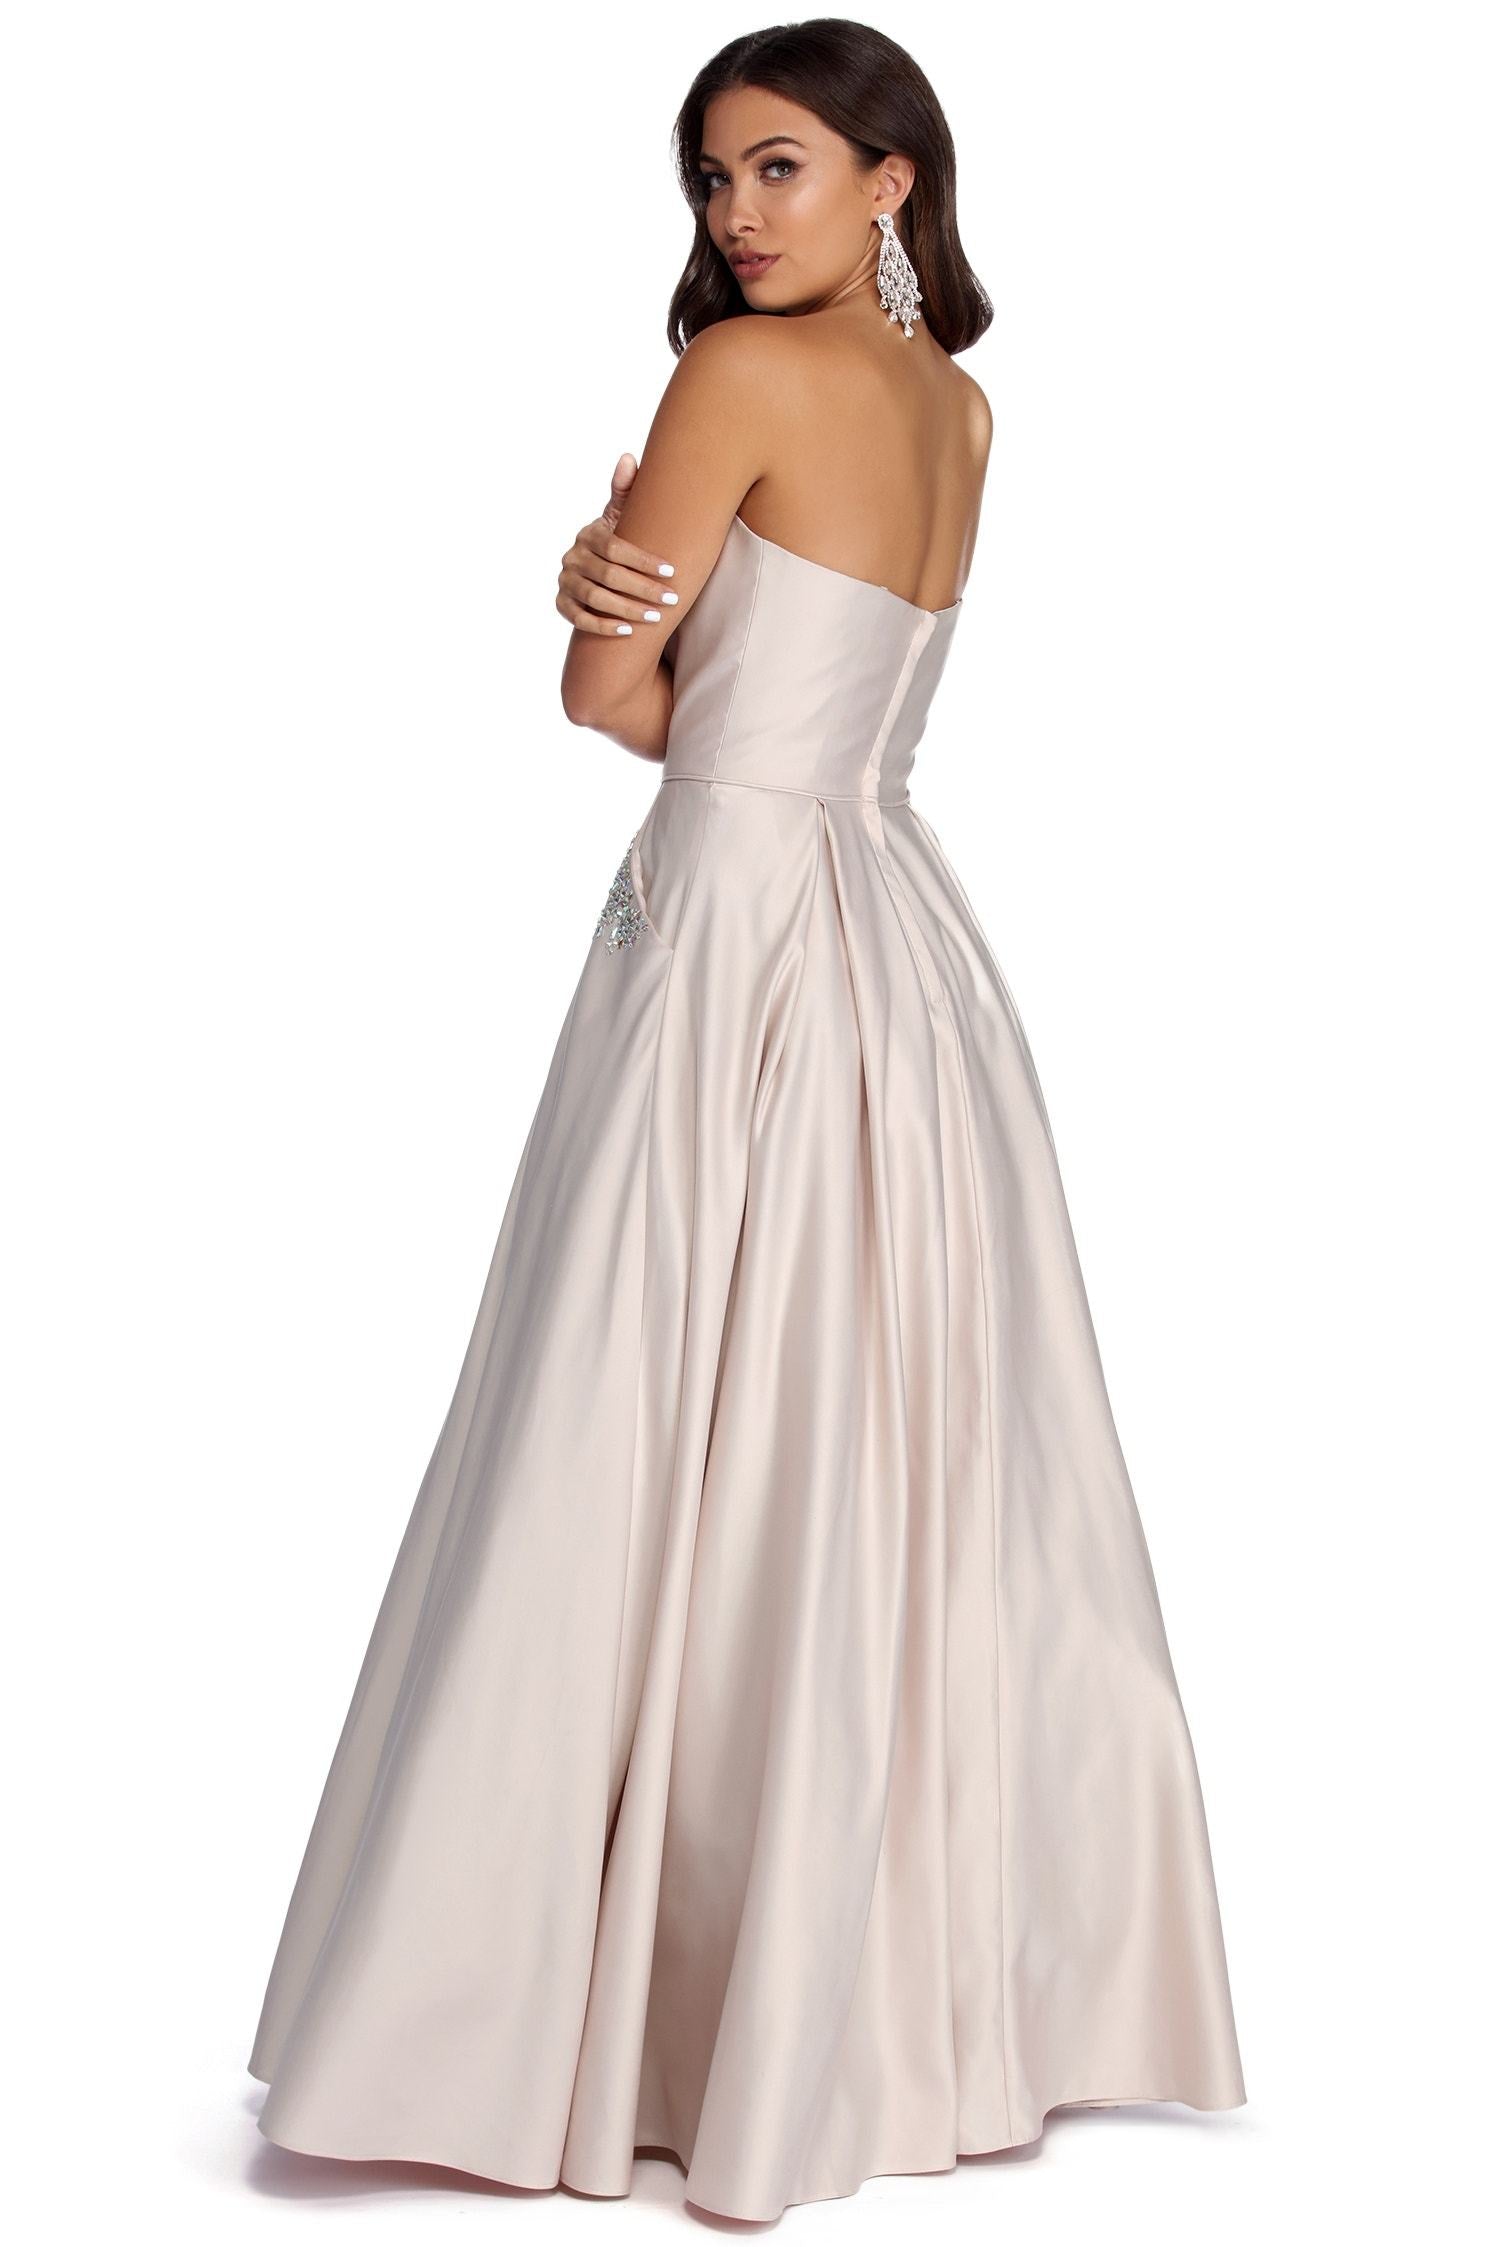 Josephine Formal Jewel Ball Gown - Lady Occasions